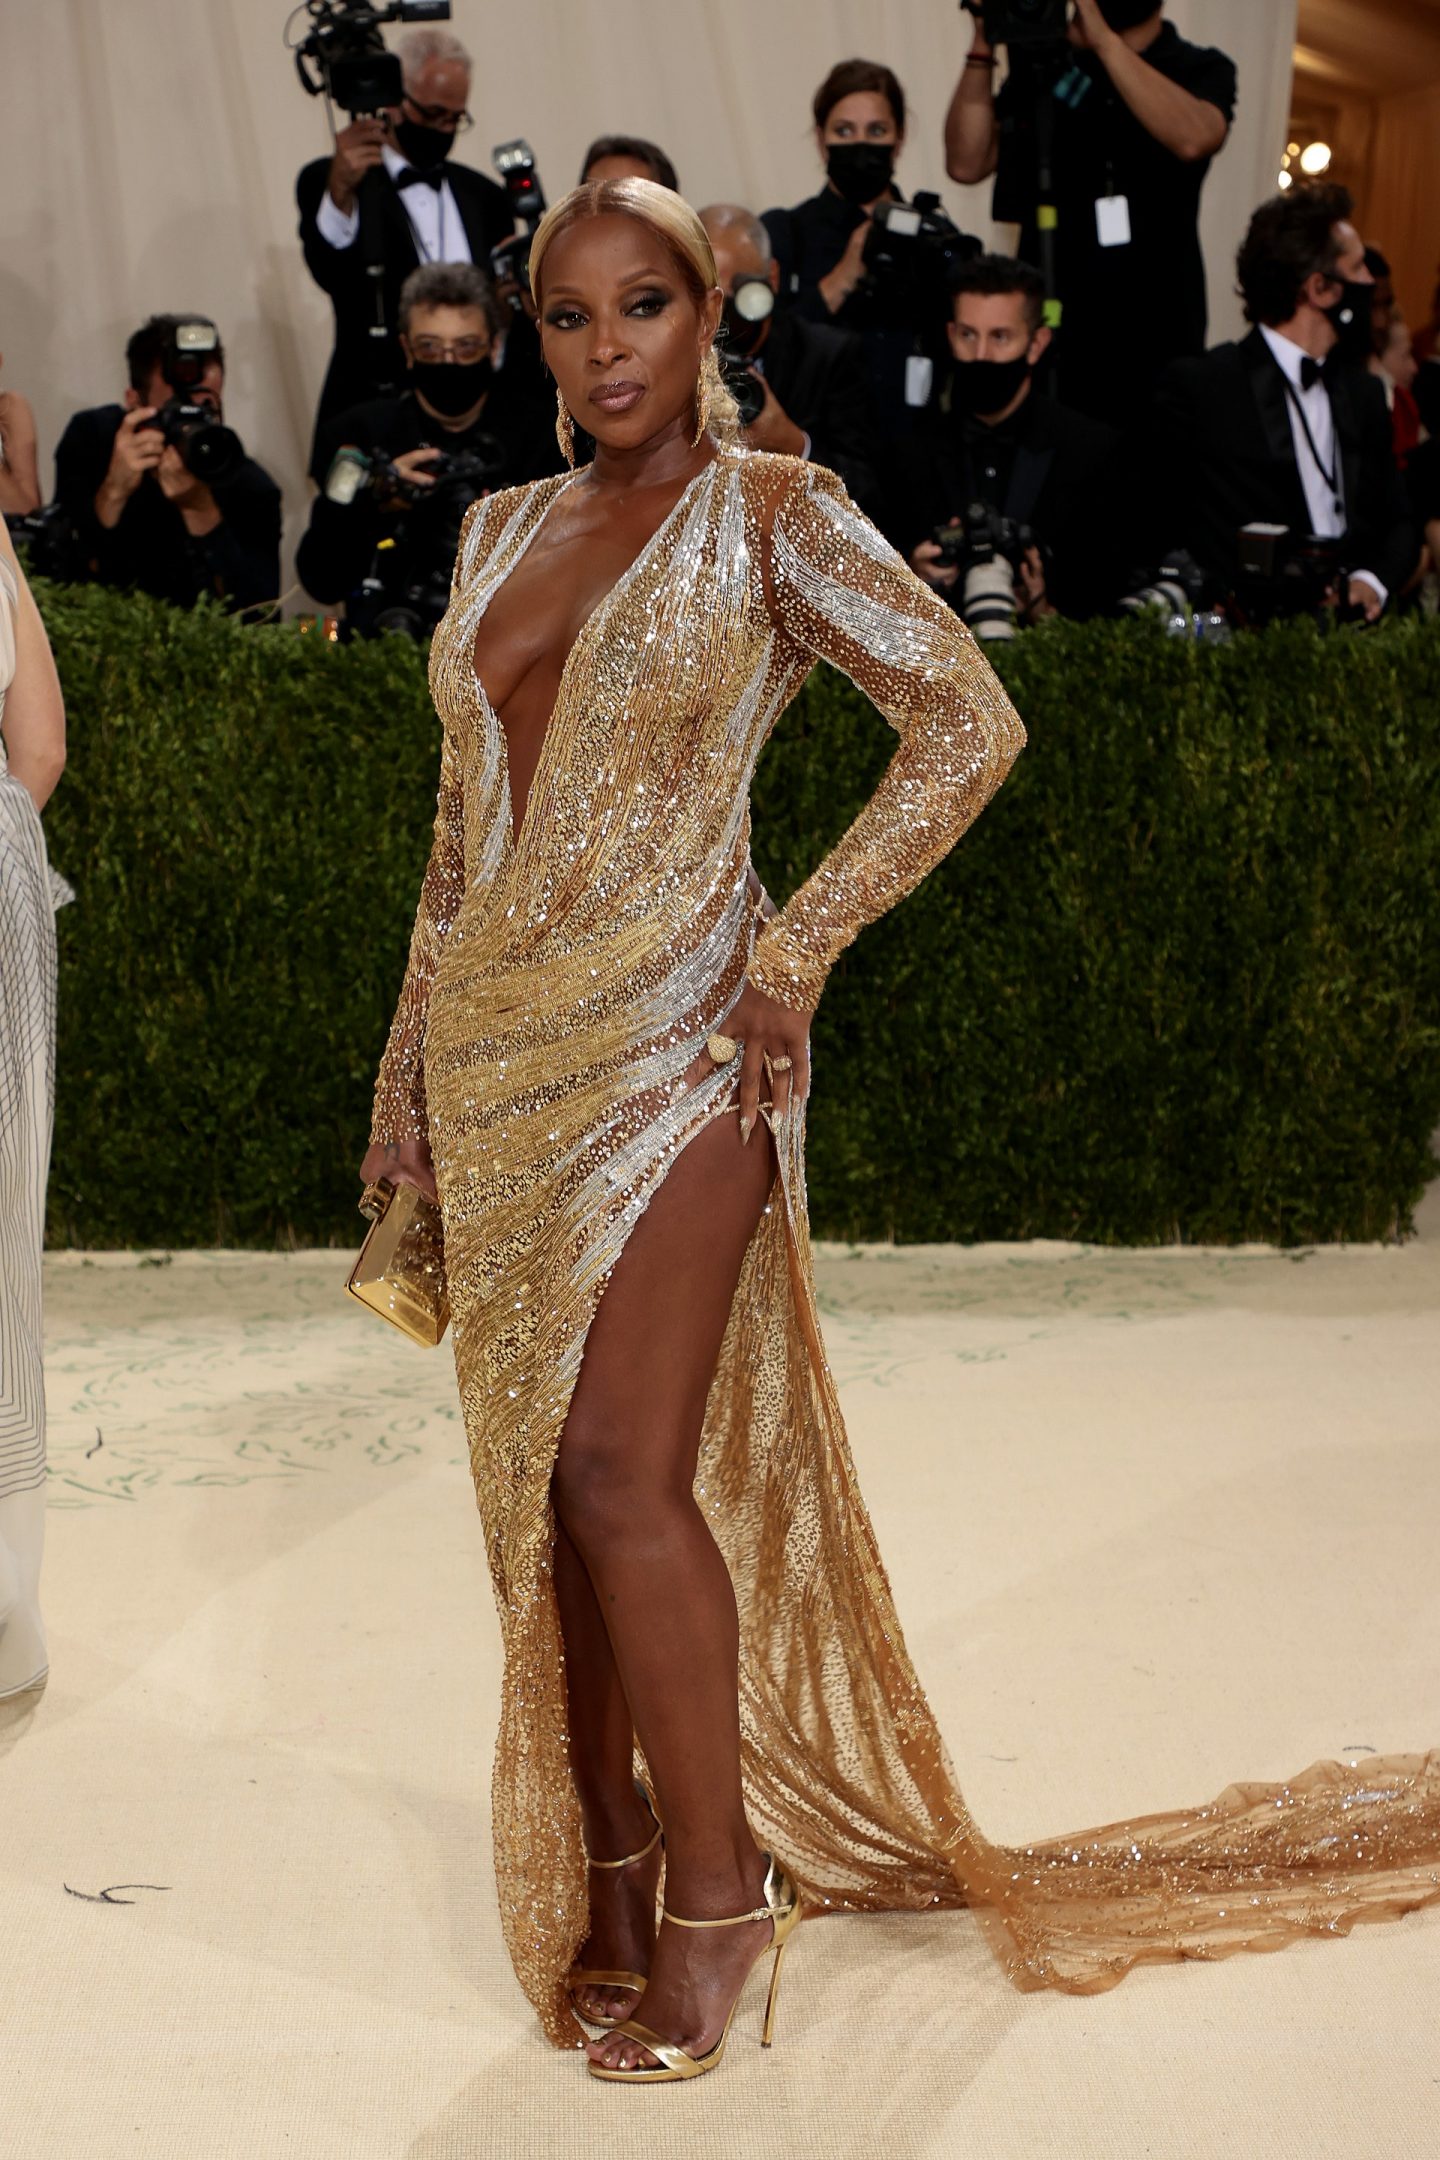 Mary J Blige in Dundas Met gala 2021 outfits